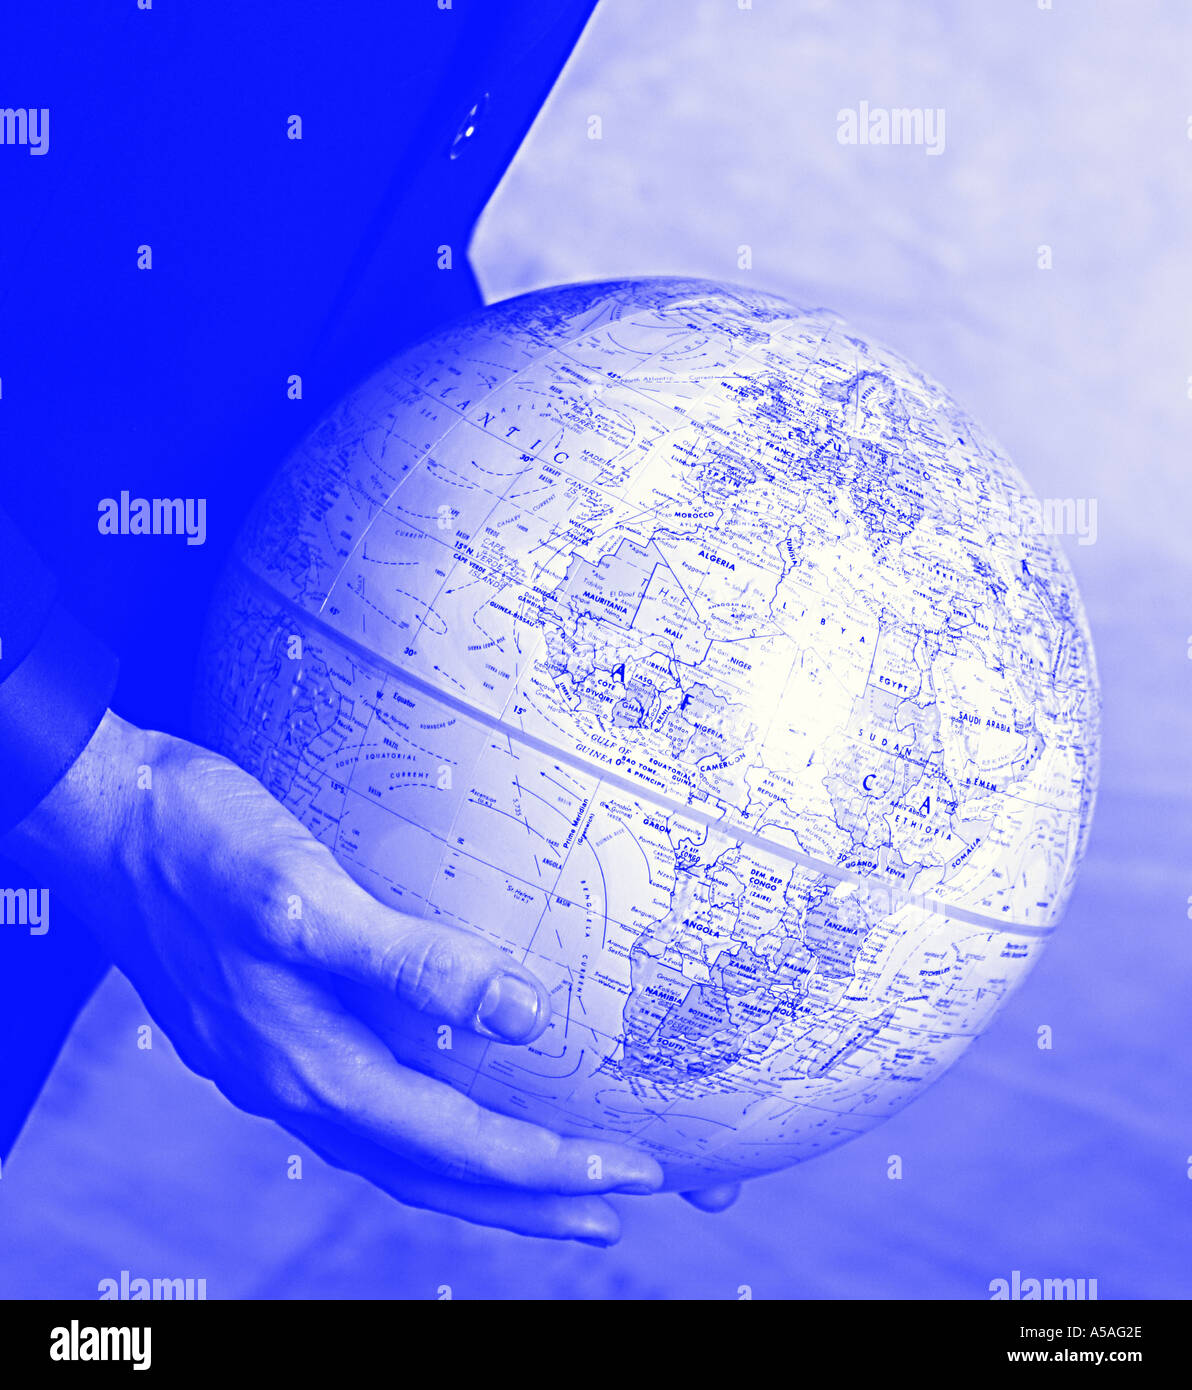 Hands holding globe in blue tint Stock Photo